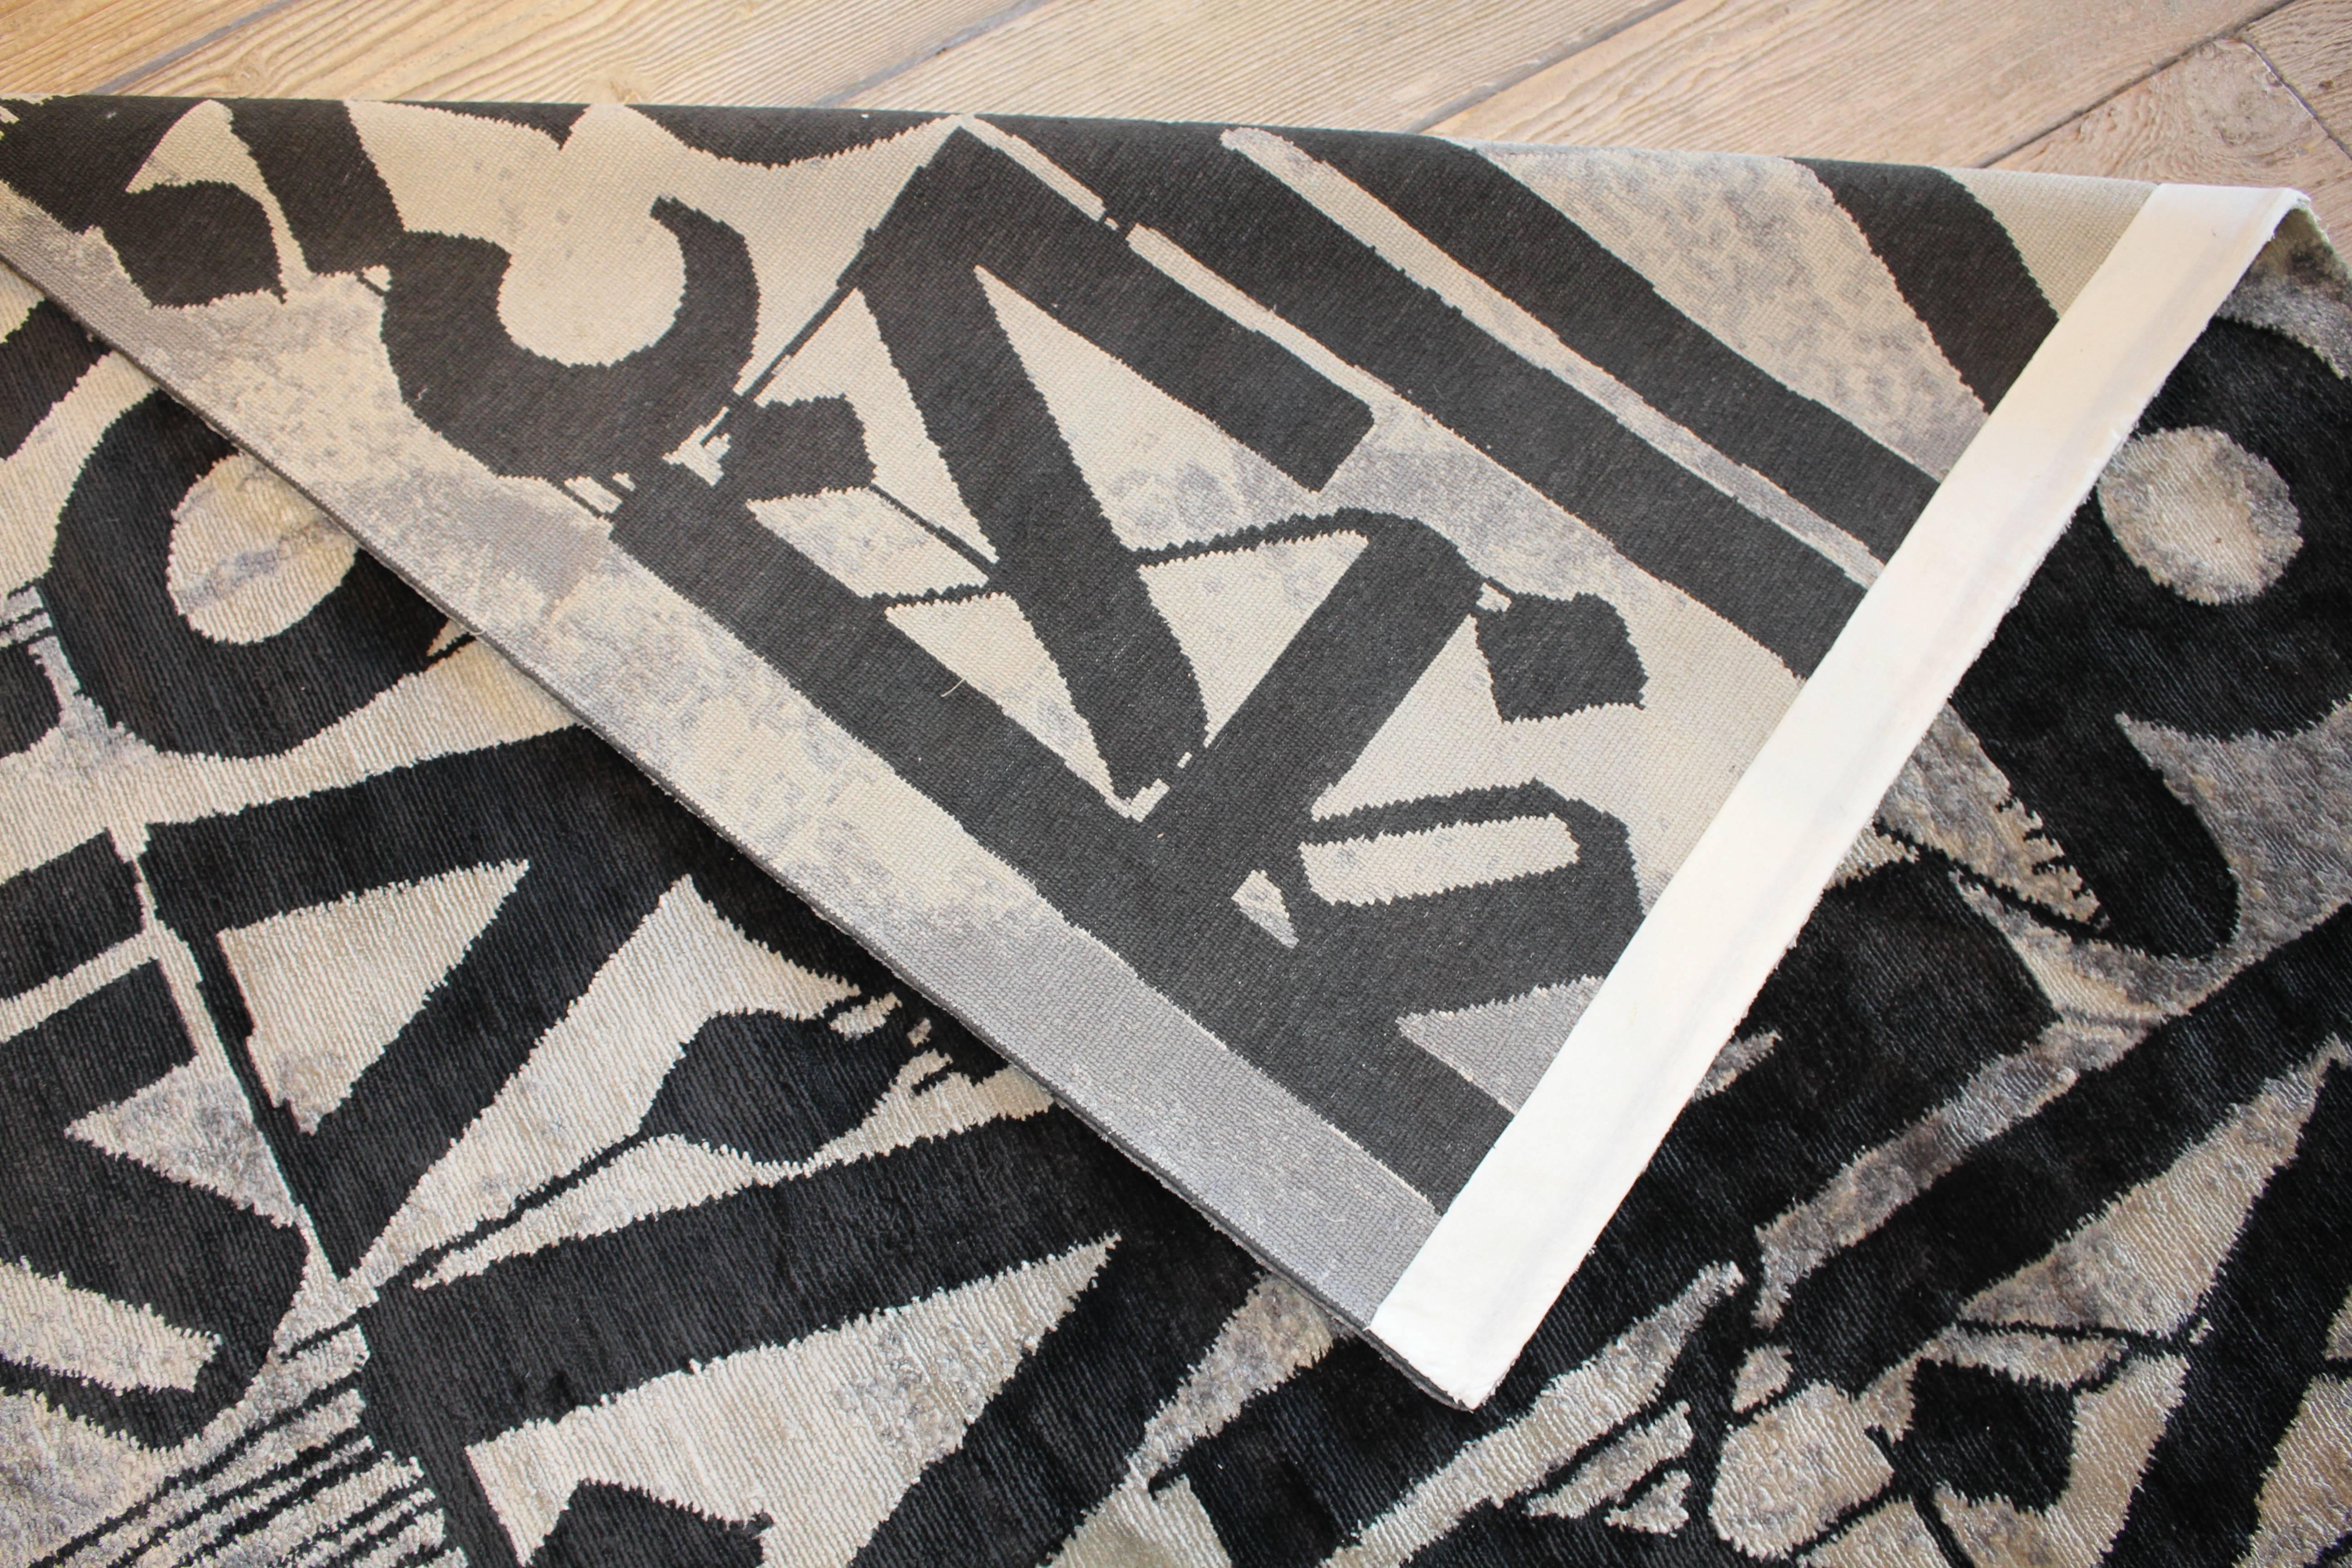 Resurrect is a limited edition silk rug by artist Retna. Measures 110" x 136".